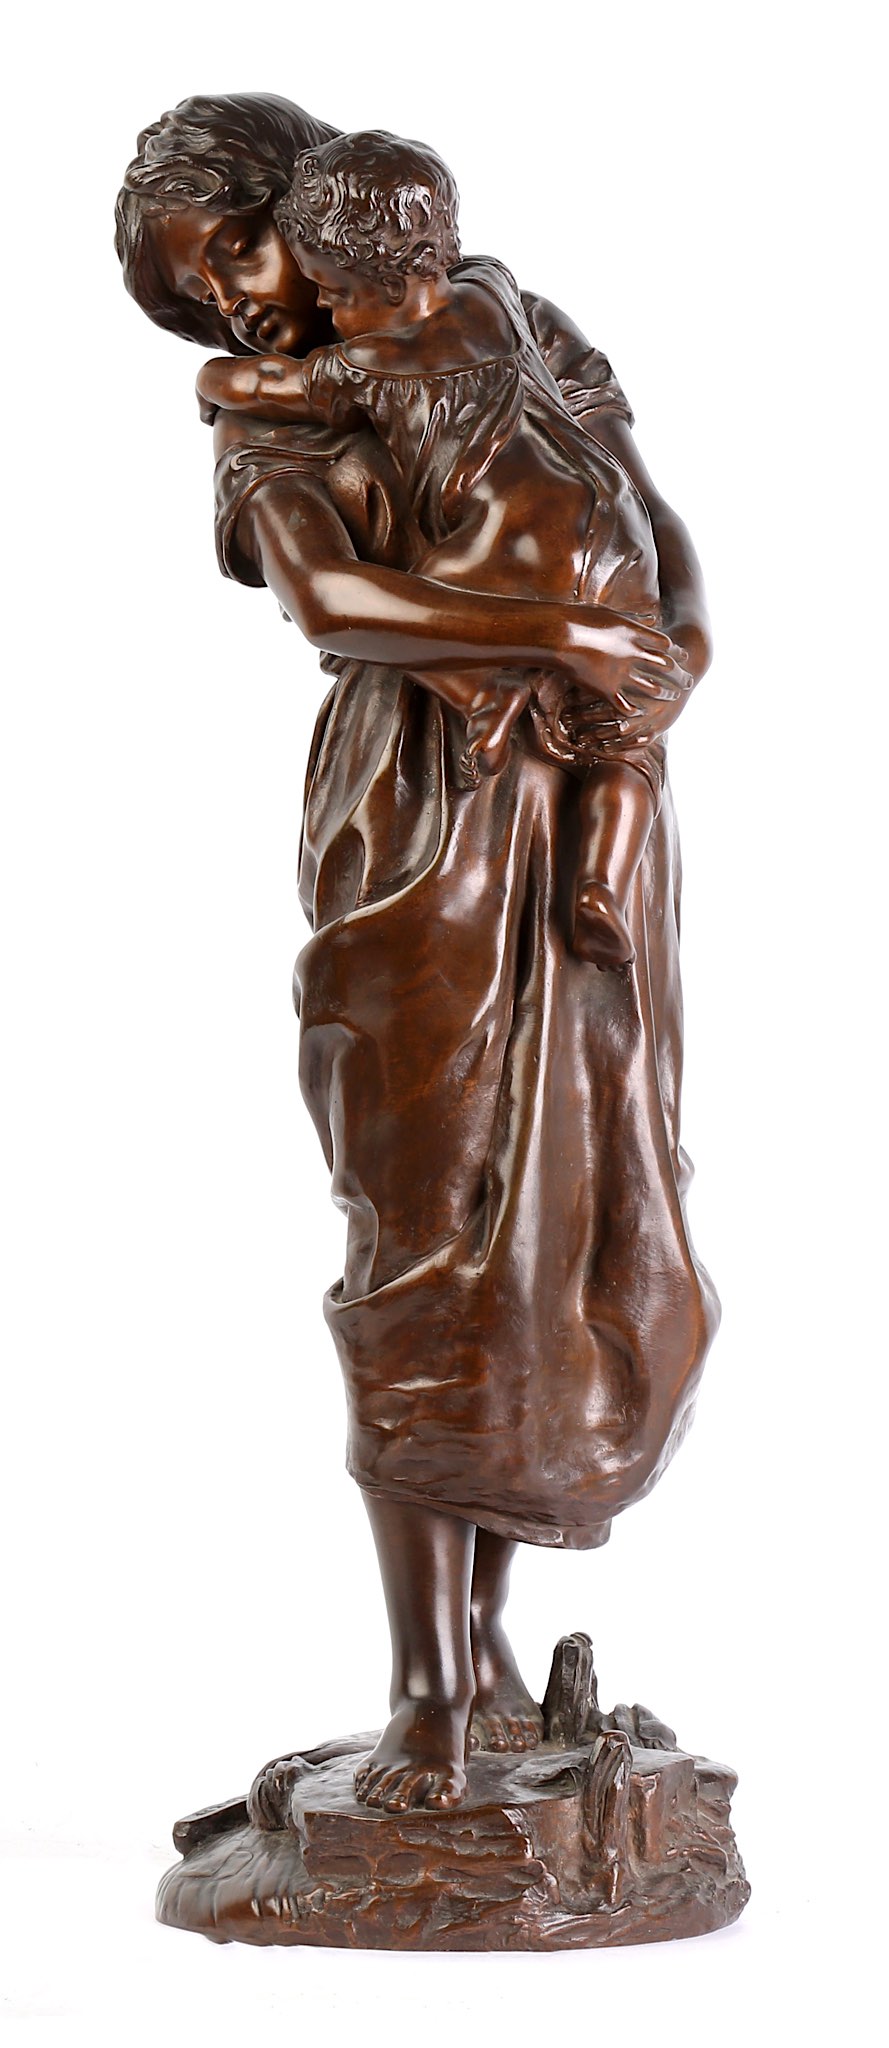 PIERRE-LOUIS DETRIER (FRENCH, 1822-1897): A LARGE BRONZE FIGURAL GROUP OF A YOUNG GIRL AND A BABY ' - Image 3 of 8